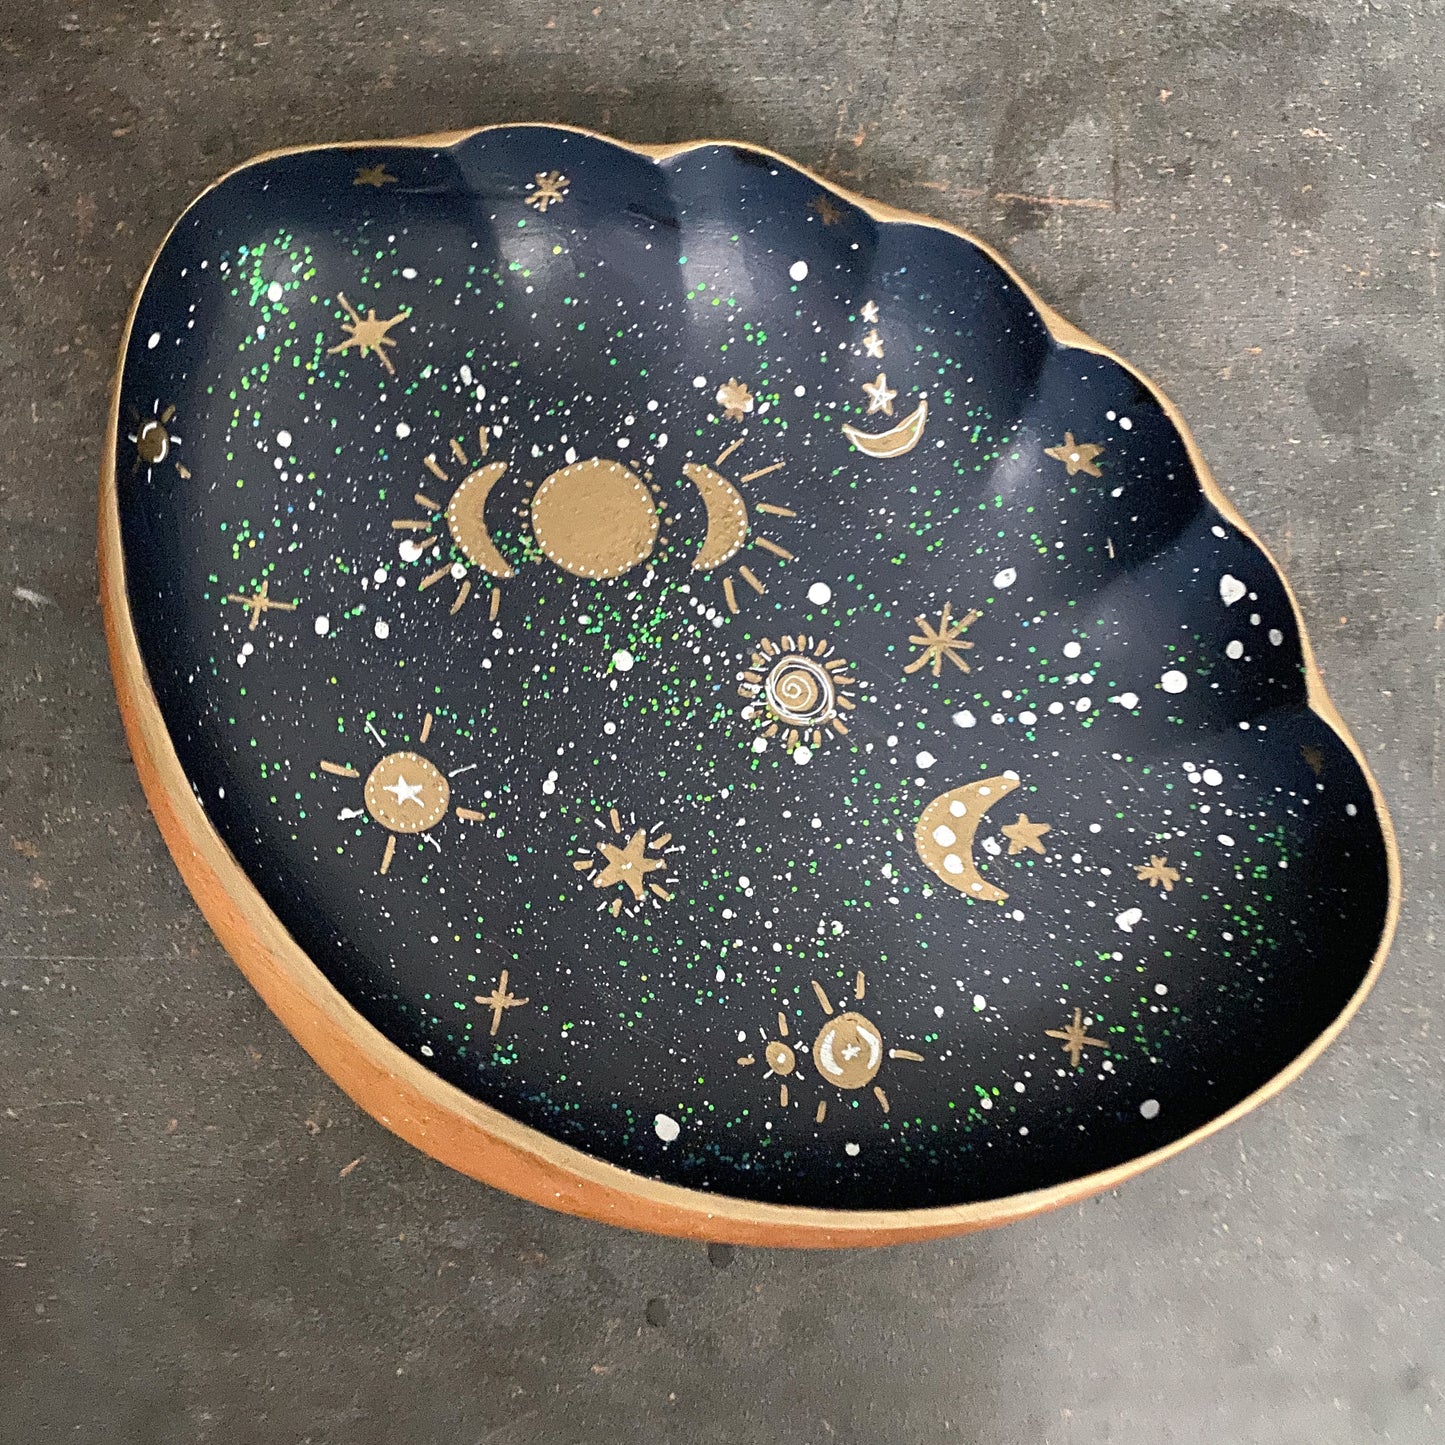 Sun, Moon and Stars, Celestial Hand Painted Vintage Wood Bowl, Scalloped Monkeypod Tray